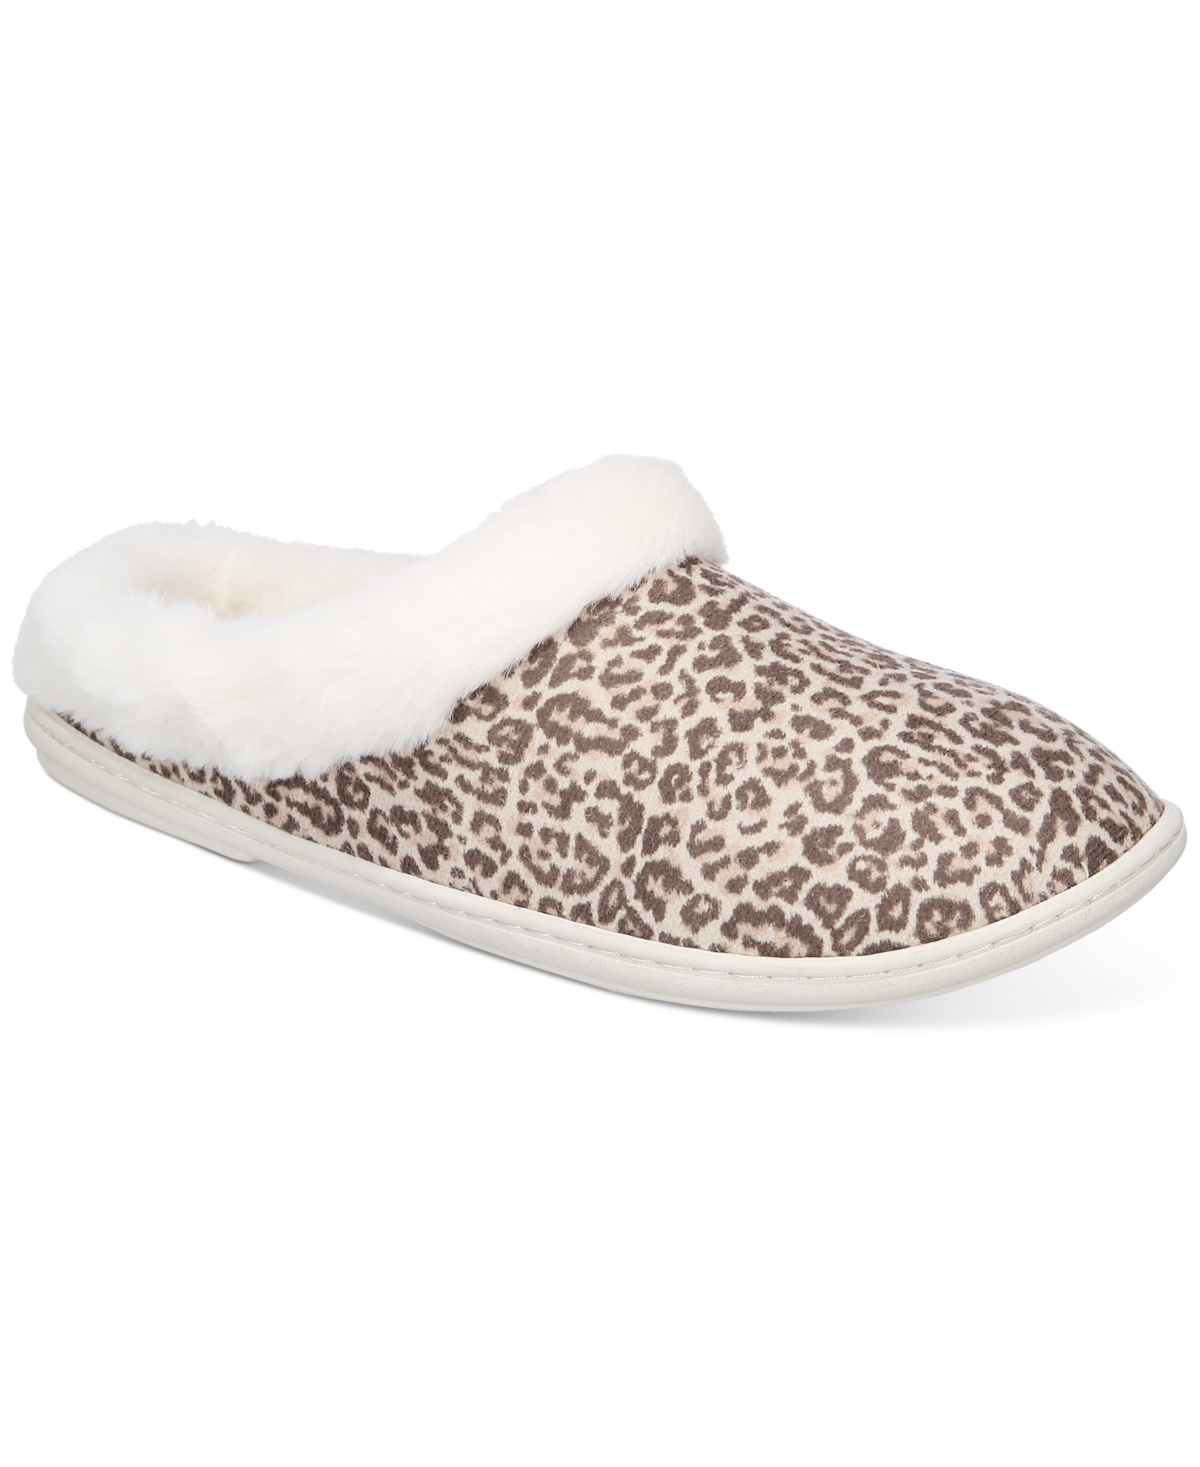 Women's Faux-Fur-Trim Hoodback Boxed Slippers, Created for Macy's - Classic Black